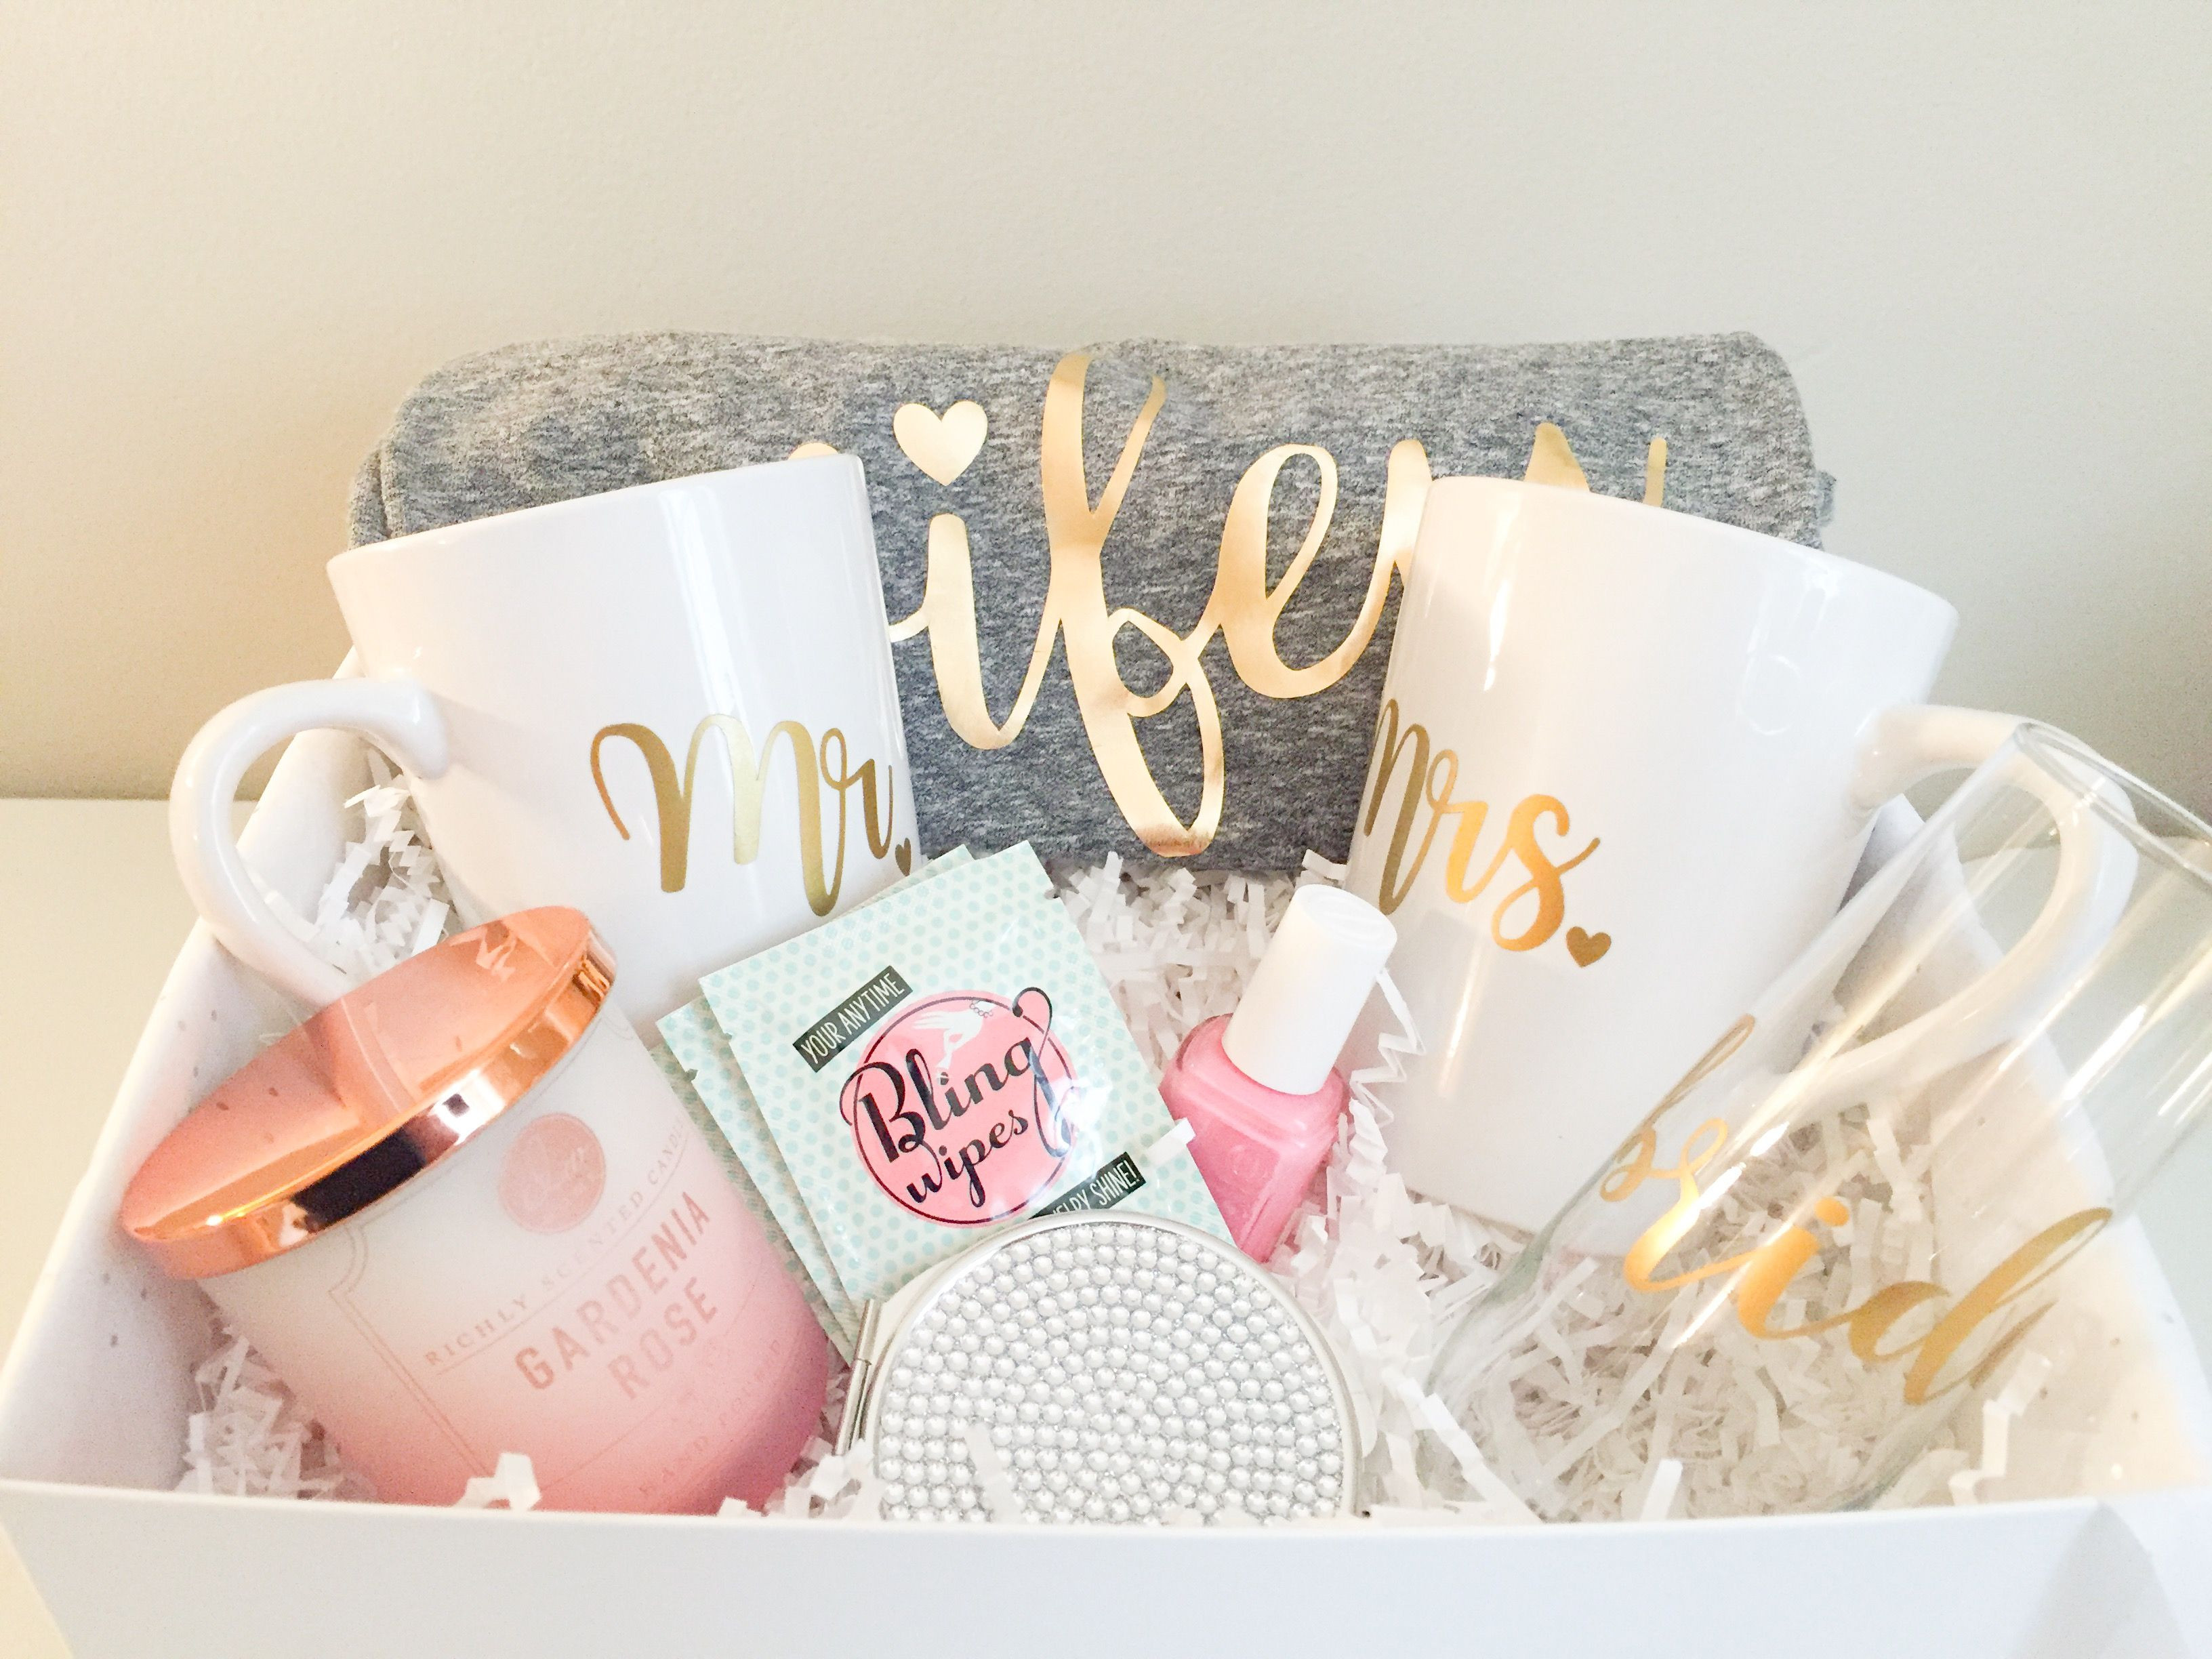 Bridal Shower Gift Basket Ideas For Bride
 Wifey Material Gifts for the Bride to Be